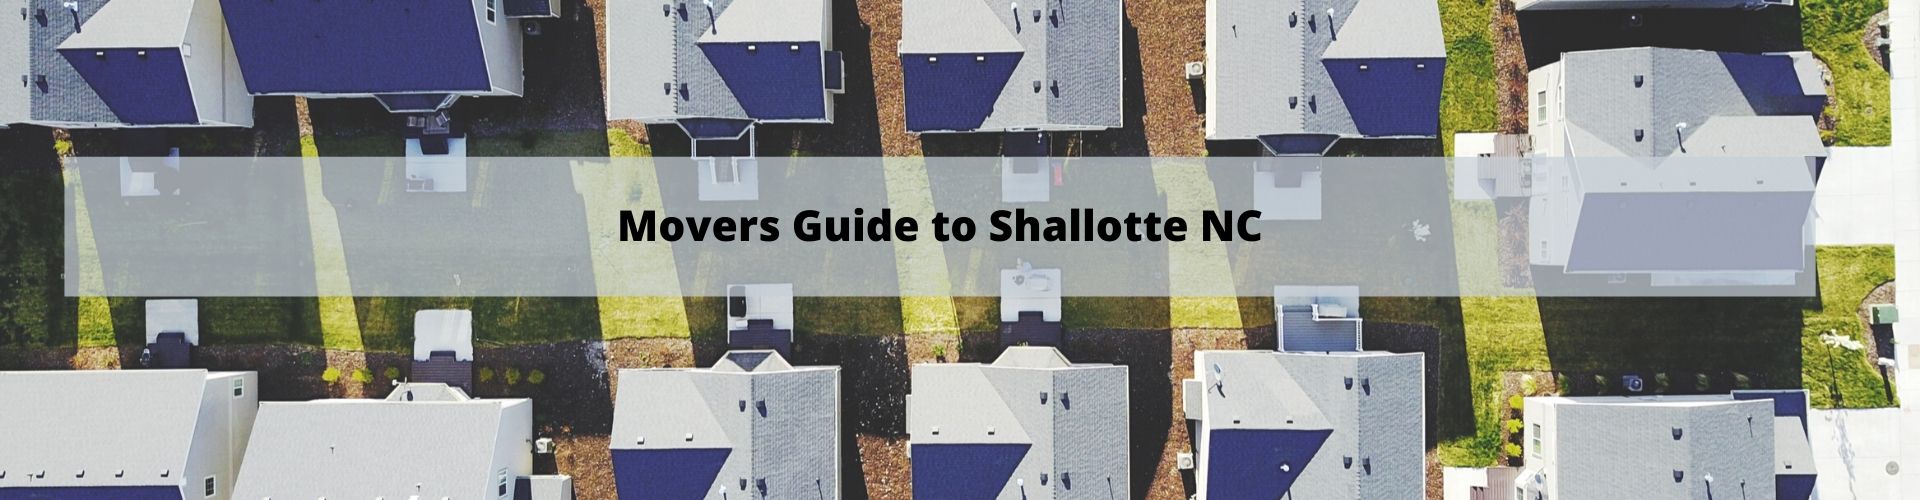 Mover's Guide To Shallotte NC